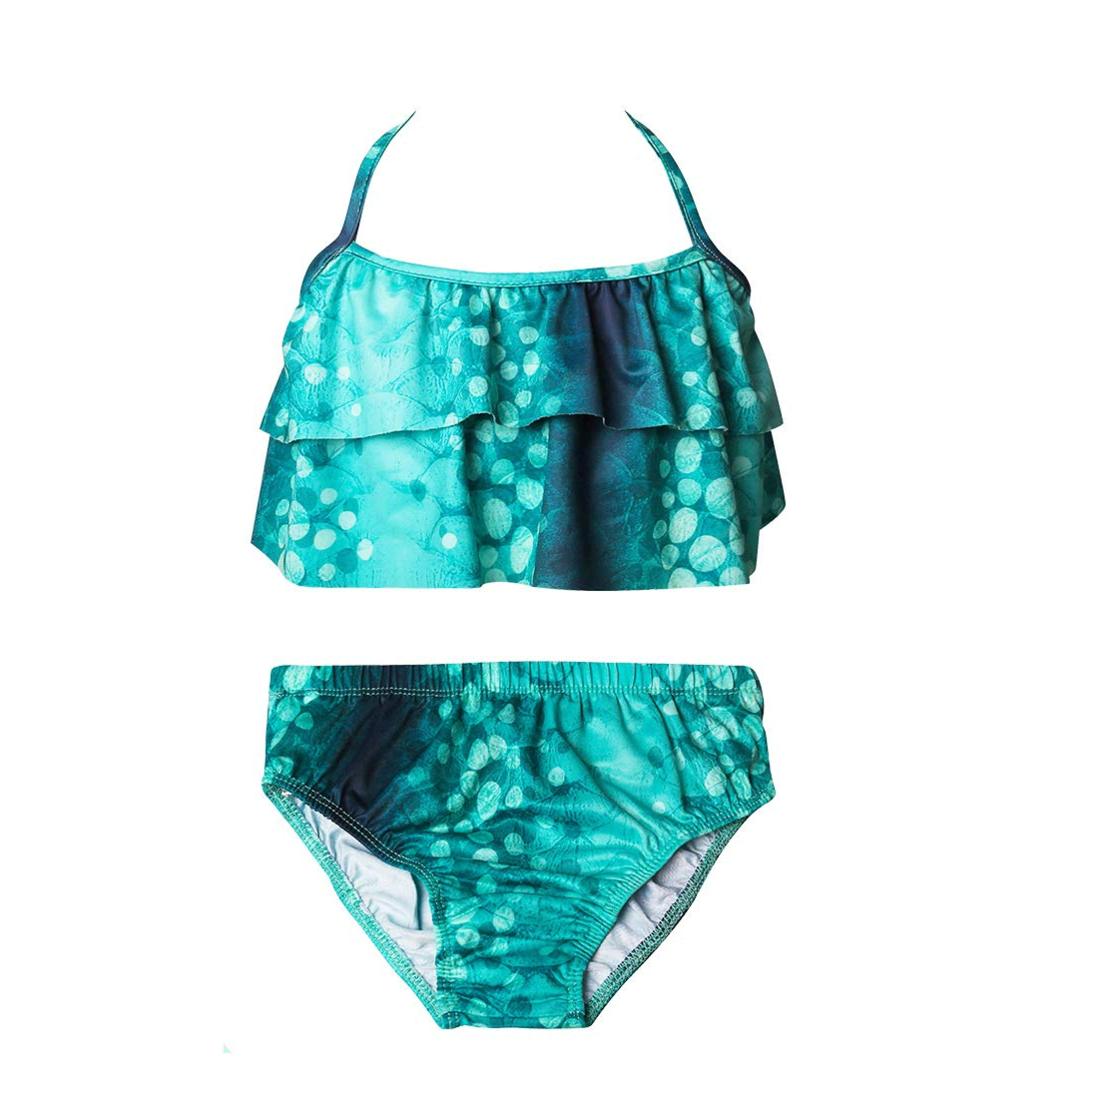 GALLDEALS 3PCS Girls' Swimsuit Mermaid Tail for Swimming, Green, Size 0 ...